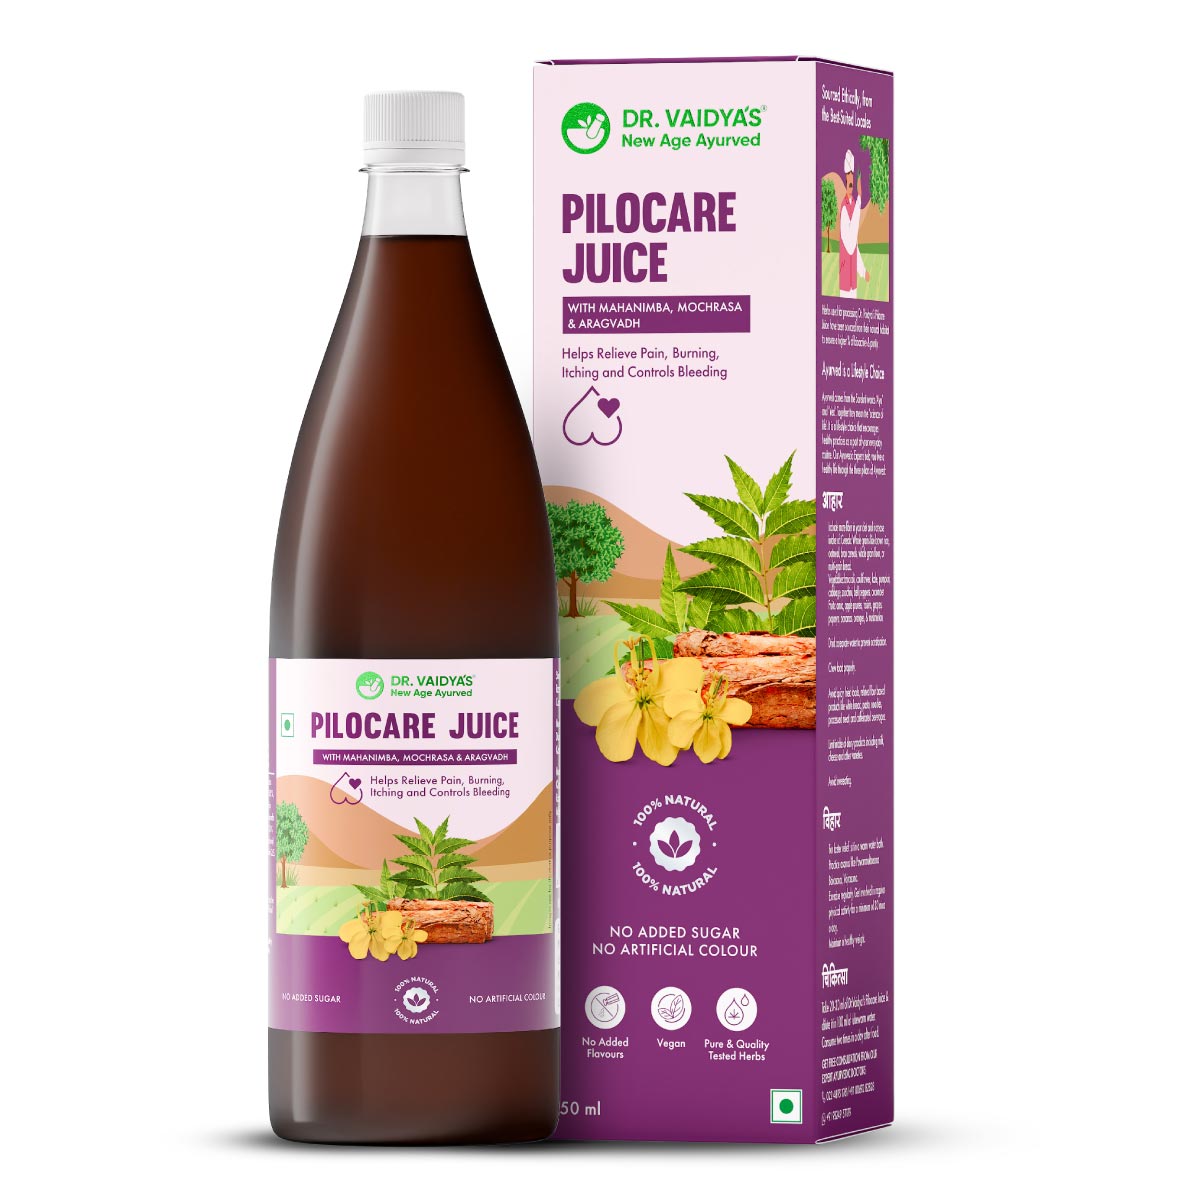 Dr. Vaidya’s Pilocare Juice - Ayurvedic & Natural Relief from Piles Pain, Swelling, Burning, & Itching